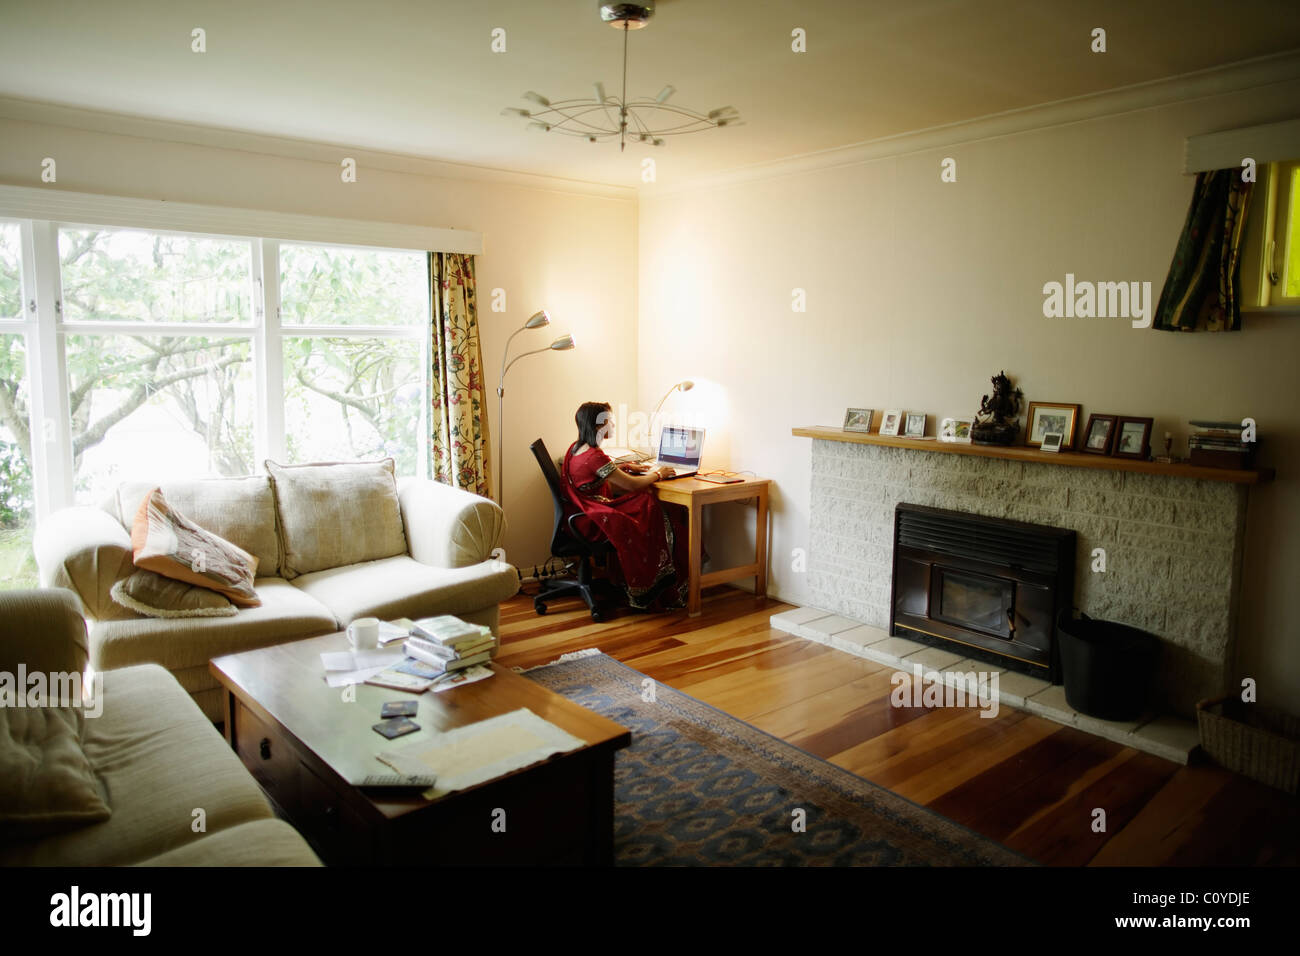 Home office. Punjabi woman in red sari working from home with desk in sitting room. Stock Photo